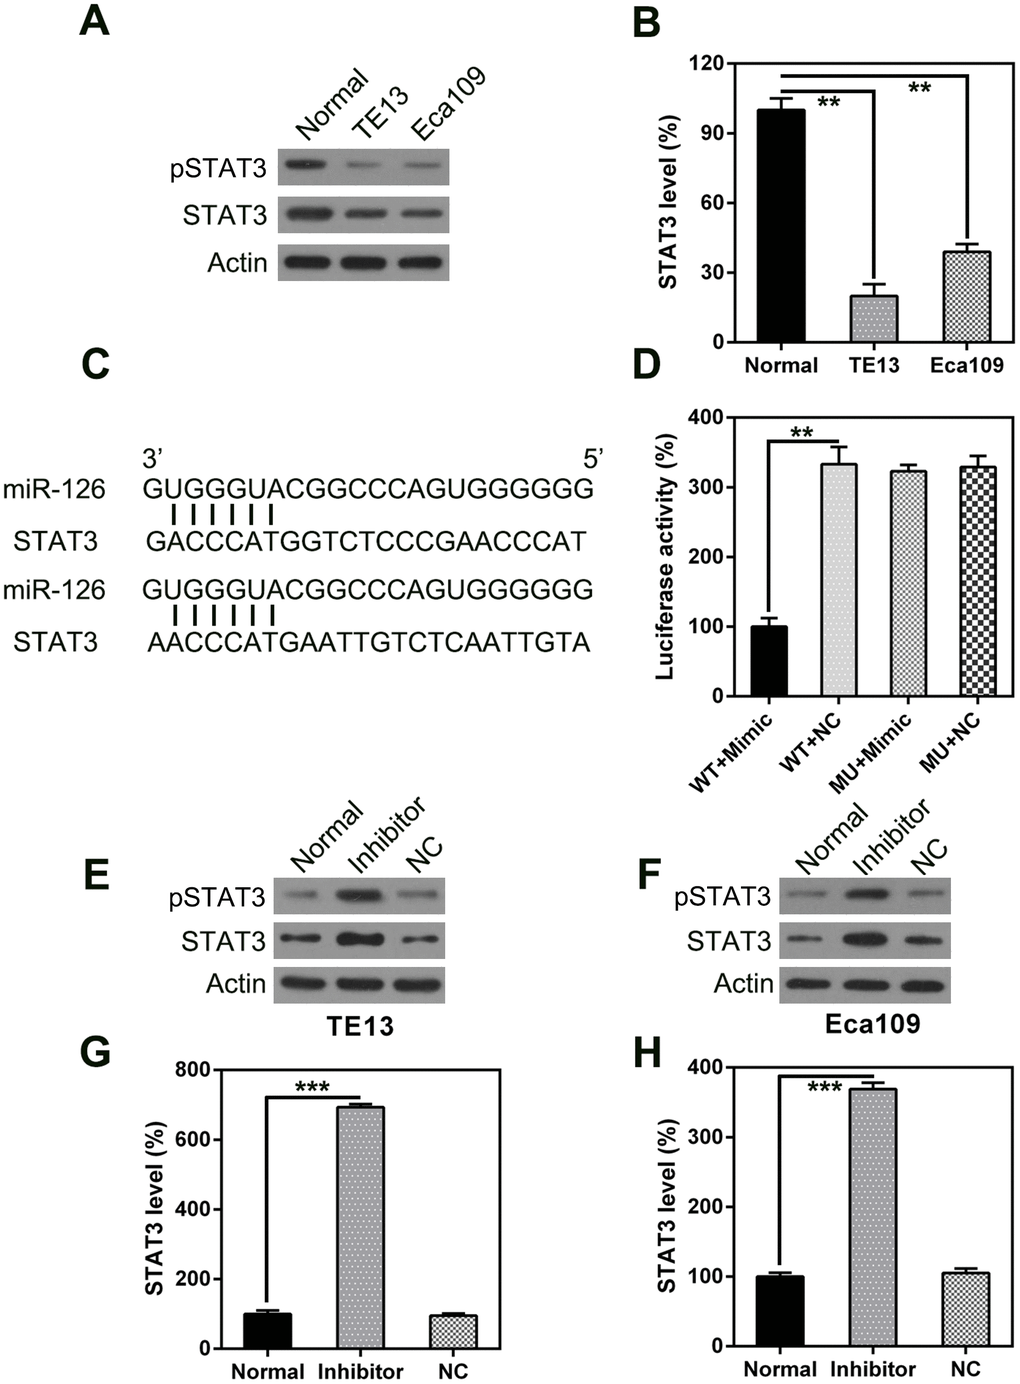 STAT3 is a direct target of miR-126. WB (A) and qPCR (B) were used to measure STAT3 expression in ESCC cells. (C) Graphical illustration of the conservative miR-126 binding motif in the STAT3 3’-UTR. (D) DLRA with luciferase reporter constructs of WT or MU STAT3 3’-UTR following transfection with the miR-126 mimic. Luciferase activity was standardized to β-galactosidase. Treatment with the miR-126 mimic dramatically reduced the relative luciferase activity in the WT 3’-UTR. WB (E, F) and qPCR (G, H) were used to measure STAT3 protein and mRNA expression following transfection with miR-126 or NC inhibitors. Results are displayed as the average ± SD. *P P P 